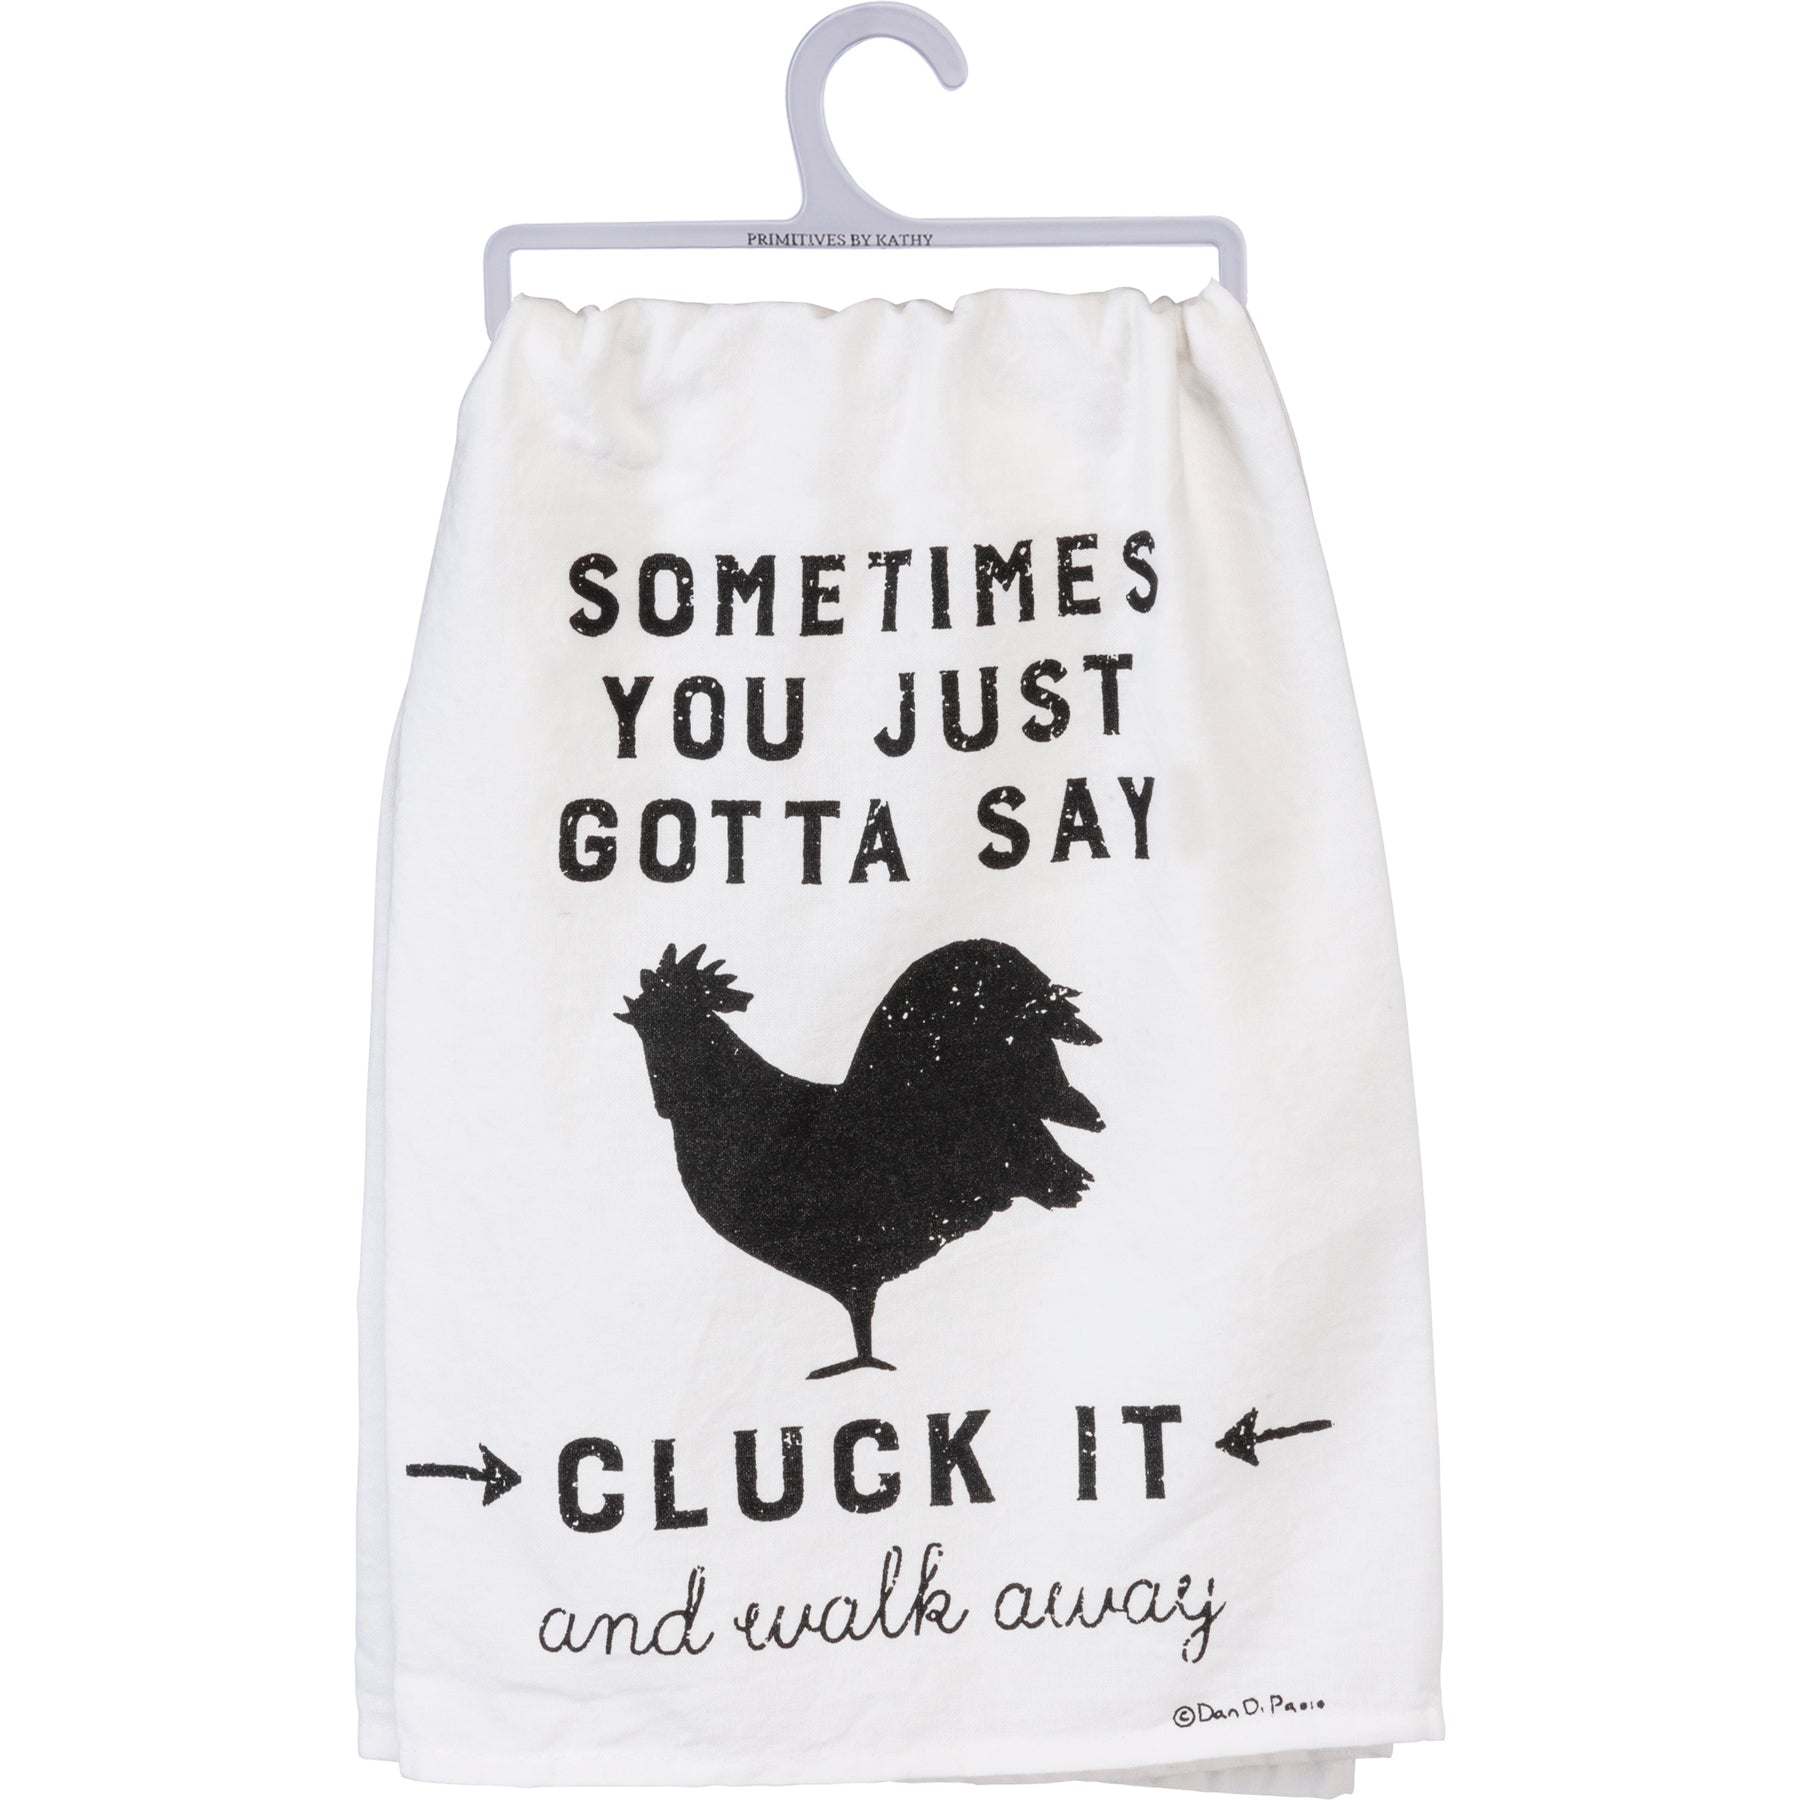 Primitives by Kathy Dish Towel - Sometimes You Just Gotta Say Cluck It